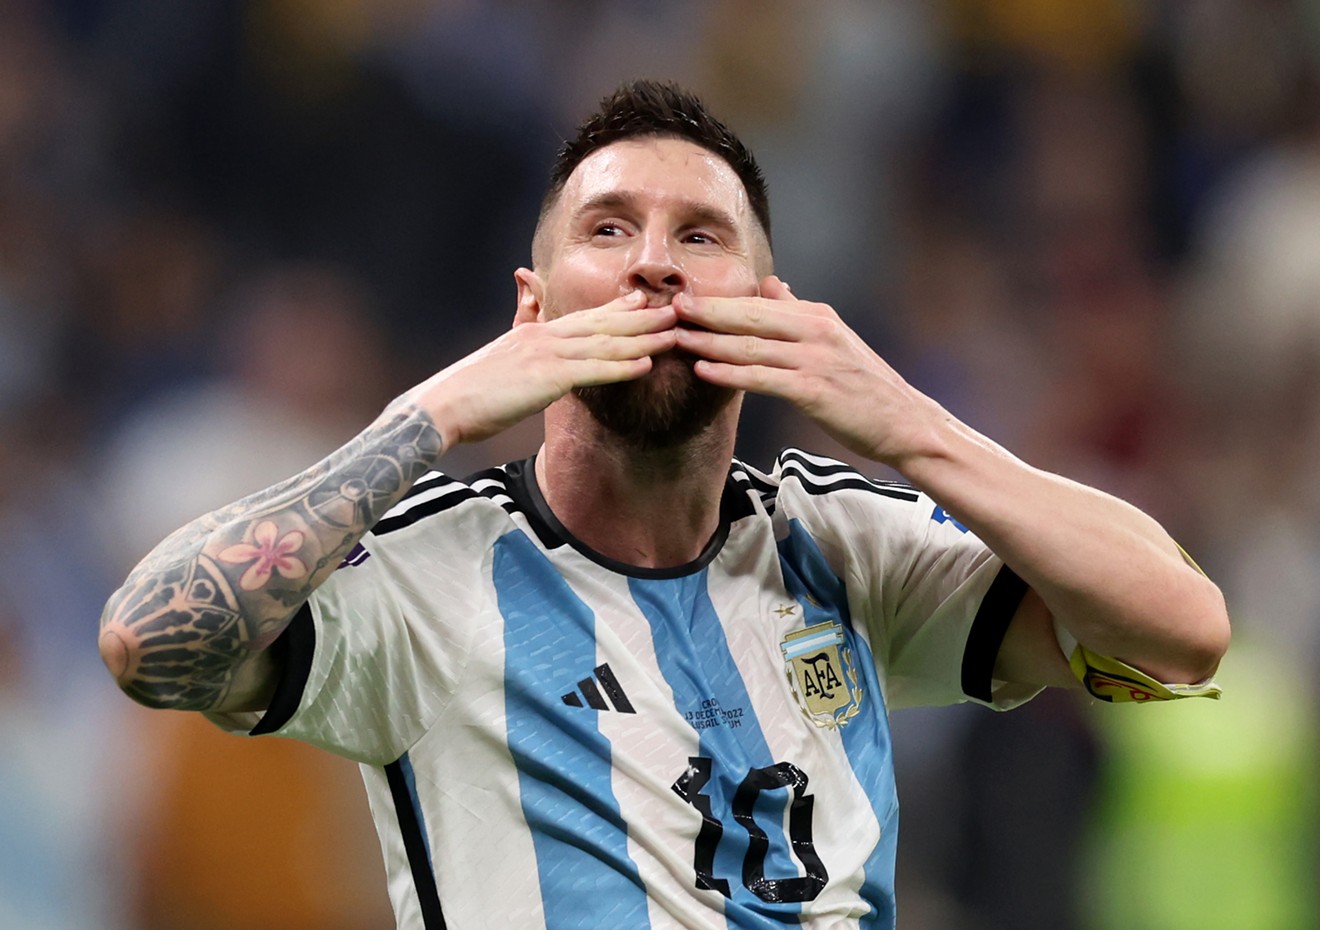 Lionel Messi during the FIFA World Cup Qatar 2022 semifinal match between Argentina and Croatia on December 13, 2022, in Lusail City, Qatar.